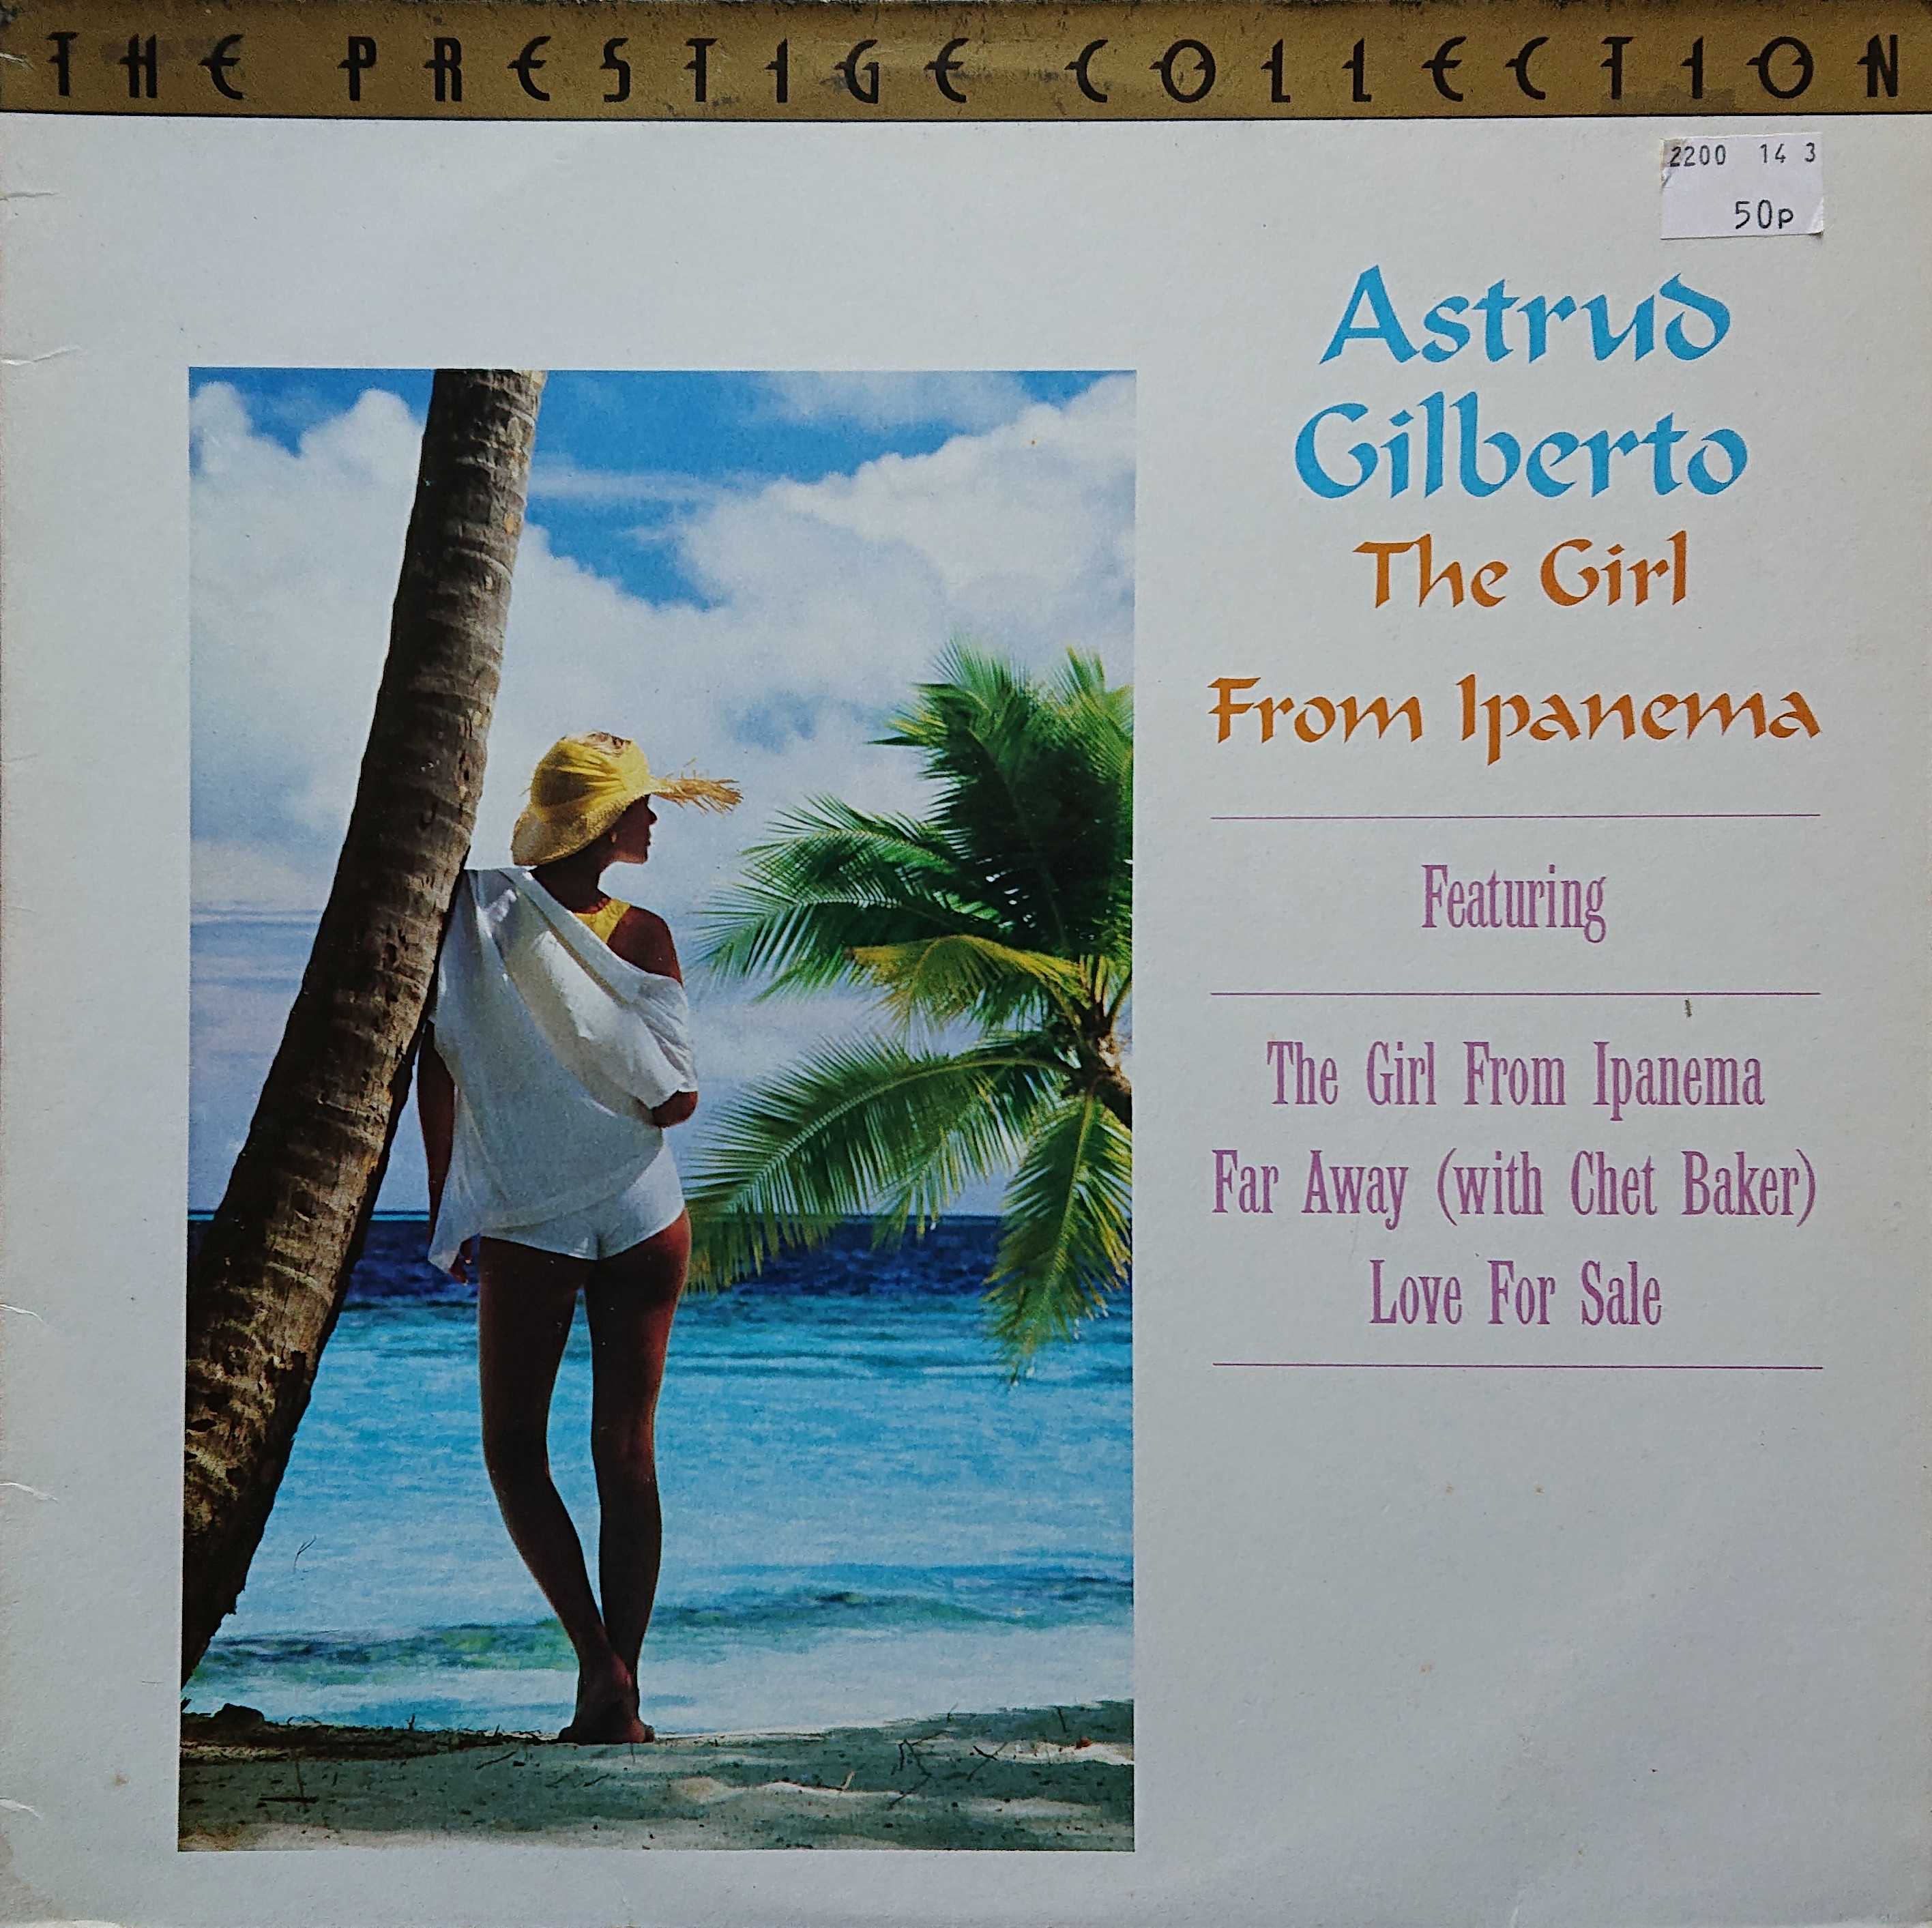 Picture of PREC 5009 The girl from Ipanema by artist Astrud Gilberto from the BBC albums - Records and Tapes library